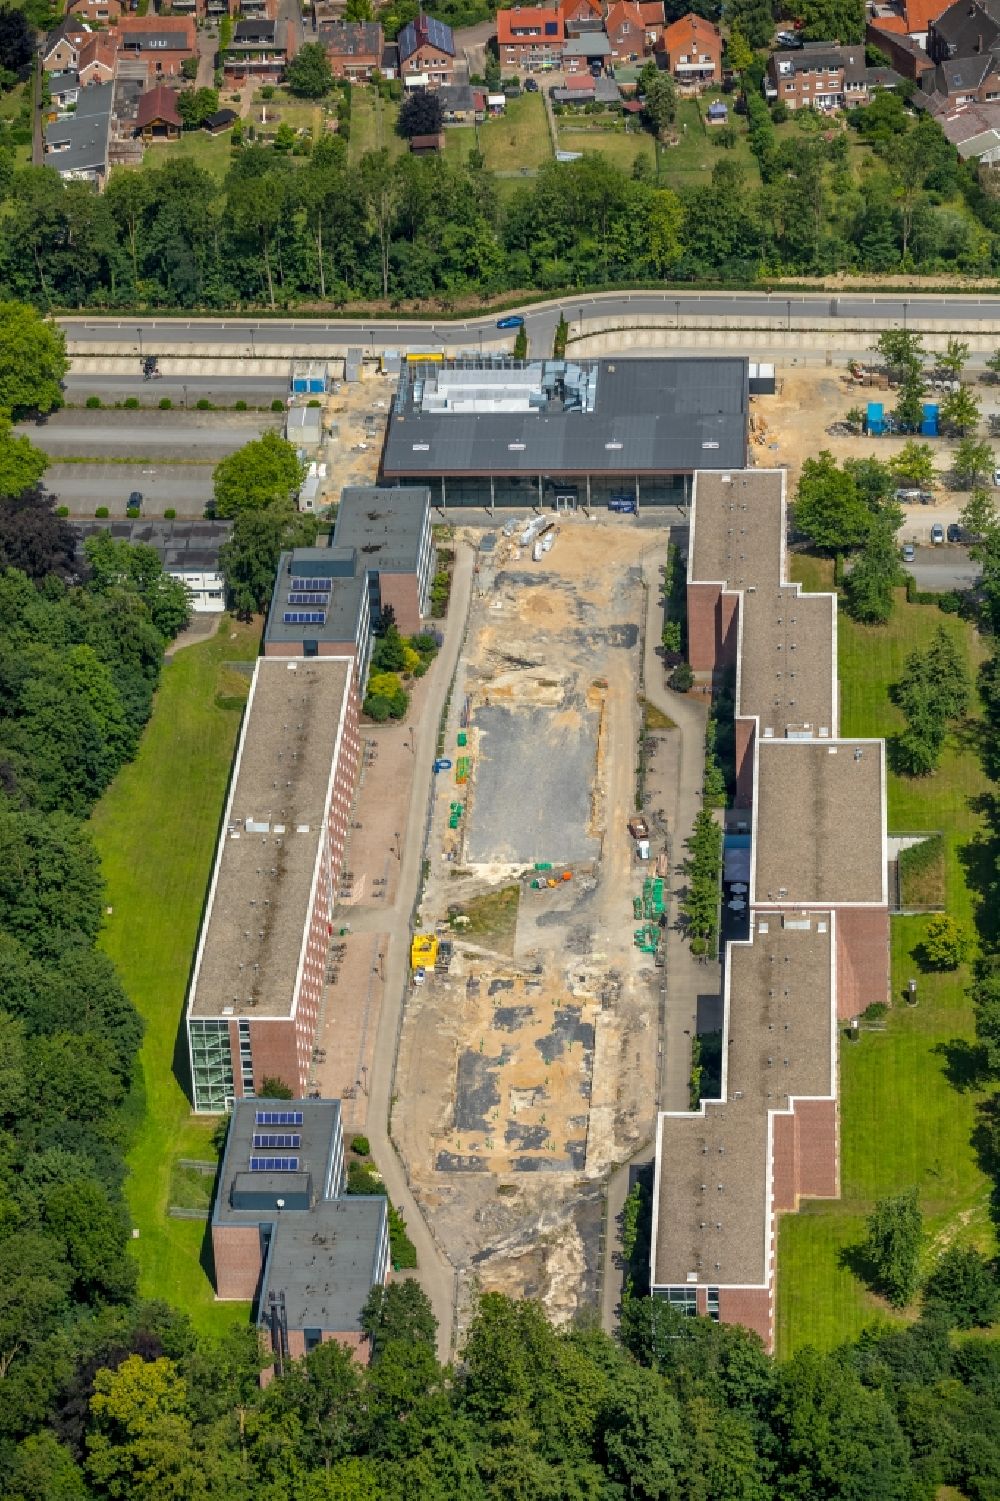 Nordkirchen from the bird's eye view: Mensa - Aula- building on the campus of the University of Fachhochschule fuer Finanzen FHF in Nordkirchen in the state North Rhine-Westphalia, Germany